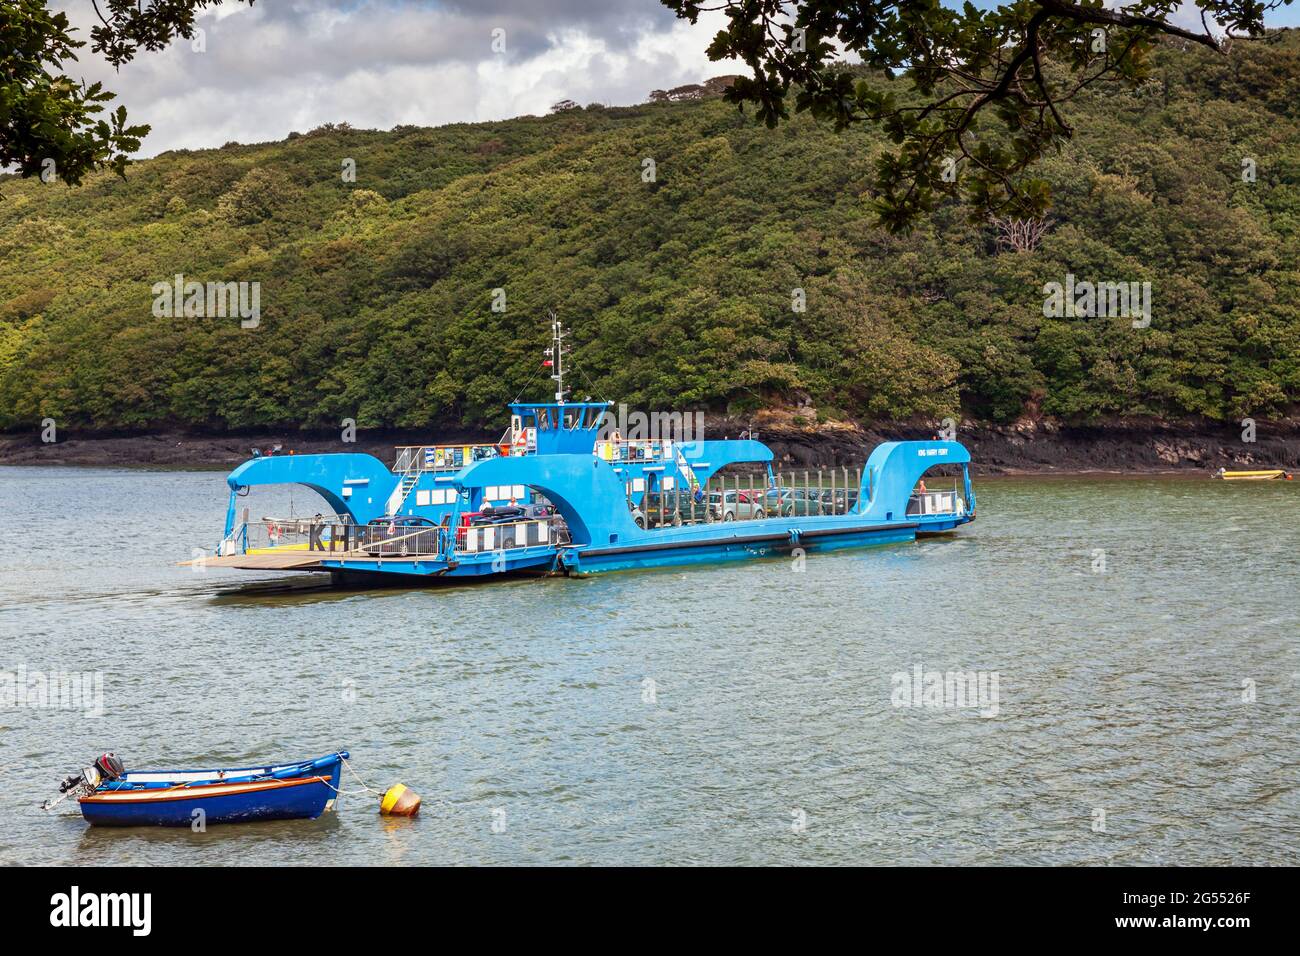 The King Harry Chain Ferry connects St Mawes and the Roseland Peninsula with Feock across the River Fal in Cornwall. Stock Photo